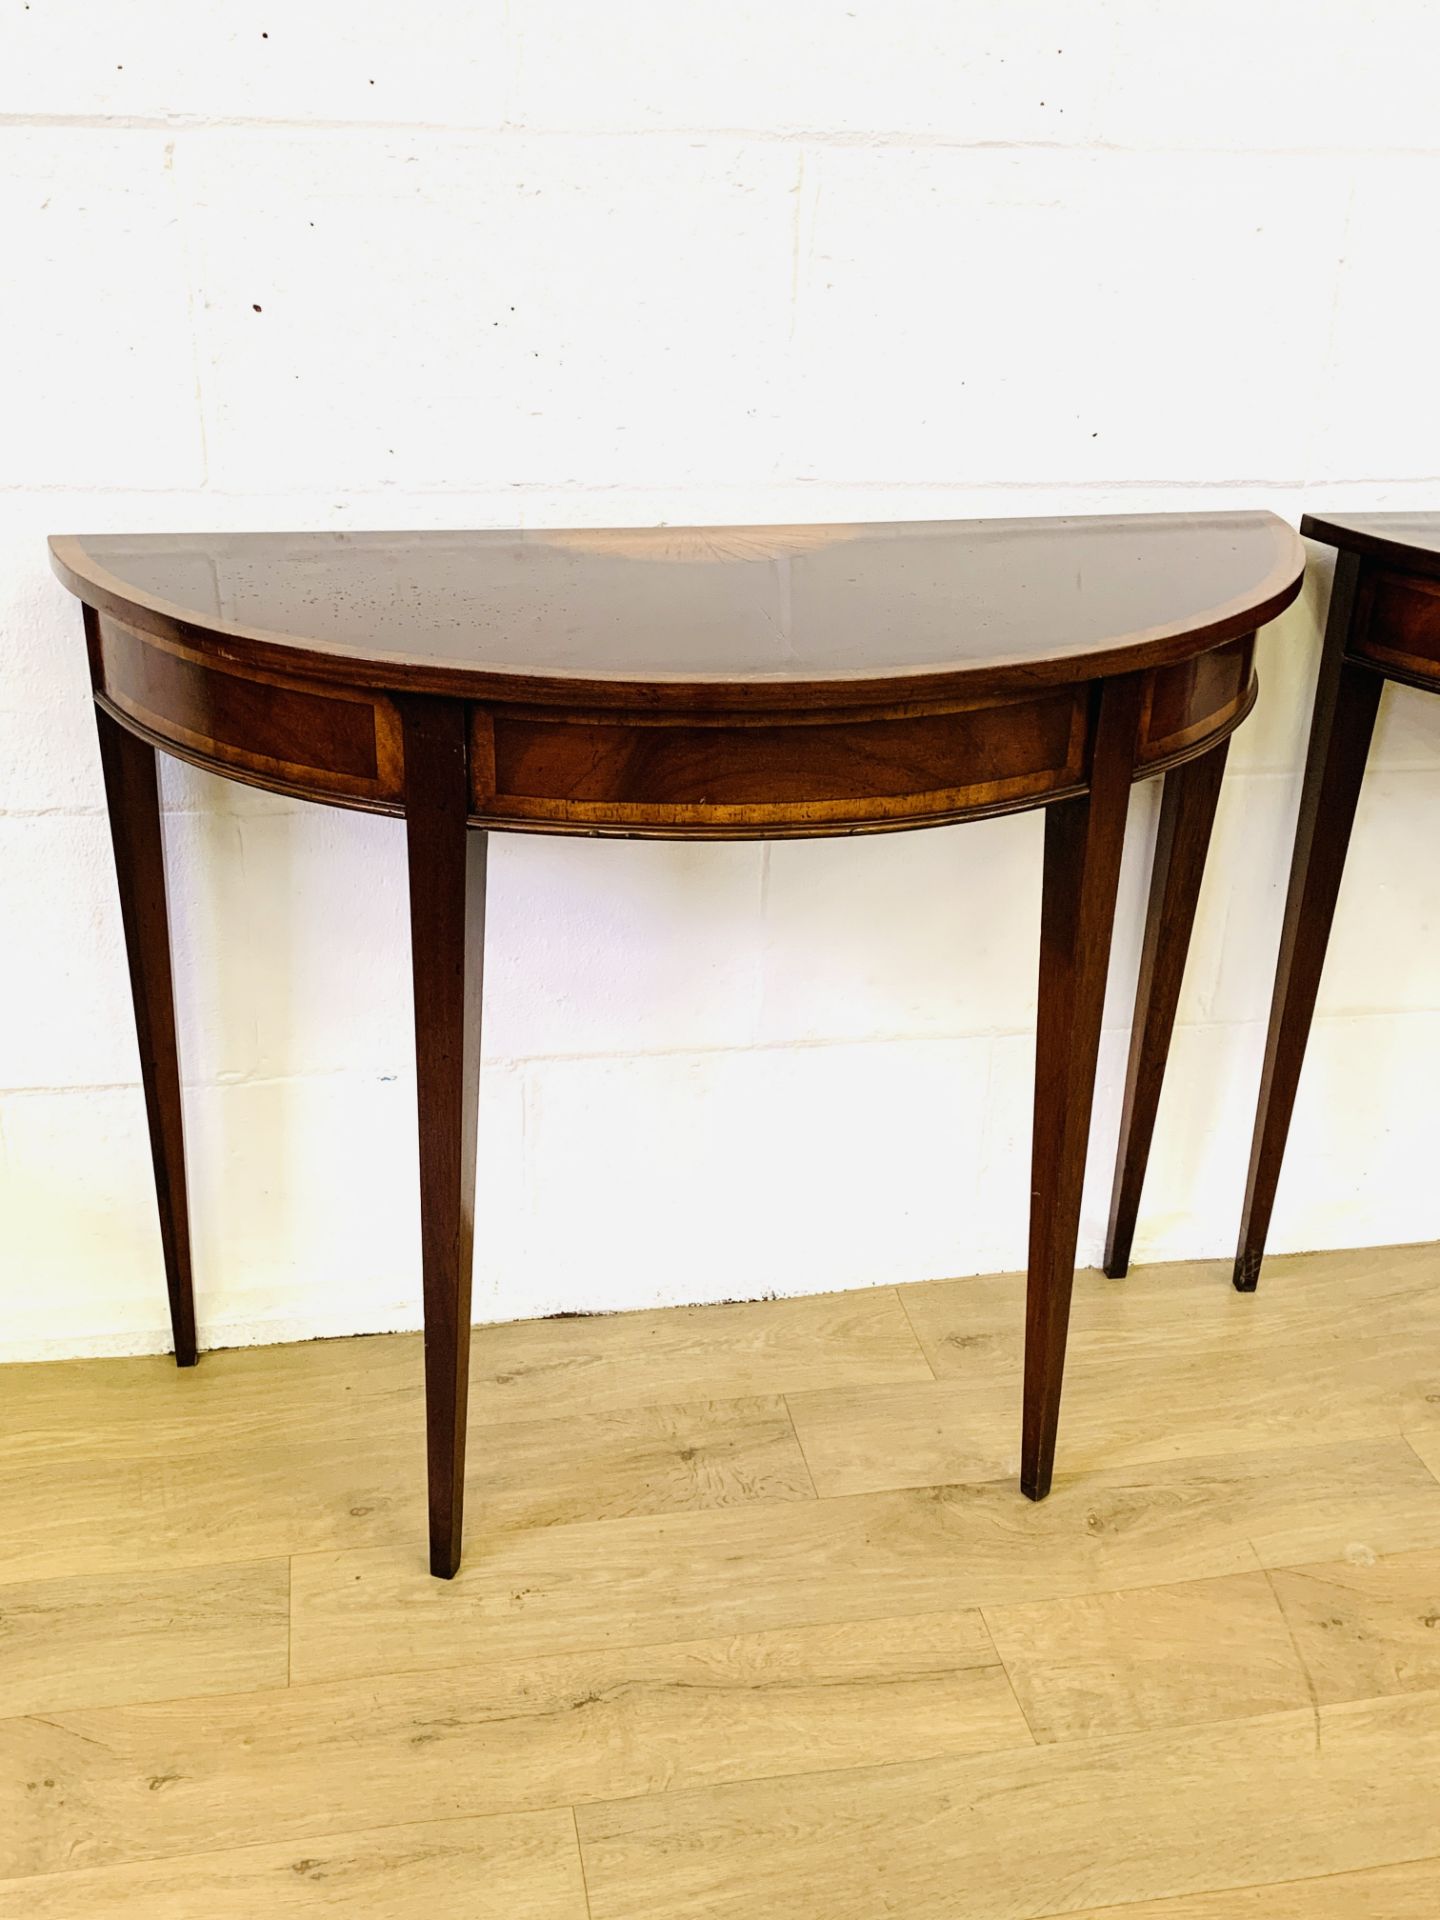 Mahogany demi-lune tables - Image 5 of 6